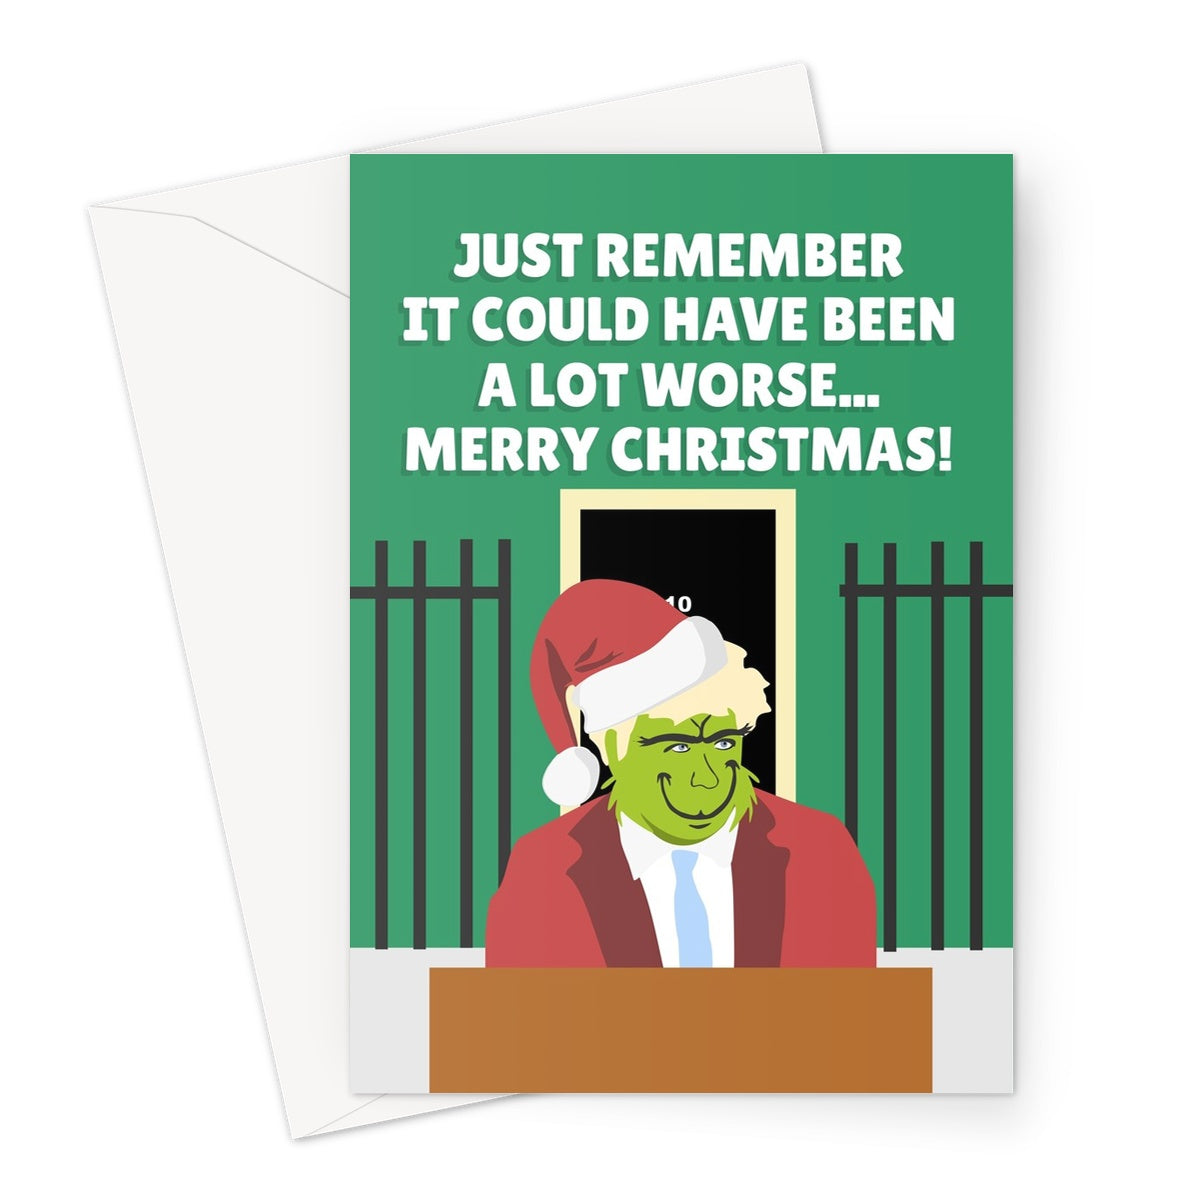 Just Remember Things Could Have Been A Lot Worse... Merry Christmas Boris Johnson Steal Xmas Funny Politics Rishi Sunak Prime Minister Greeting Card